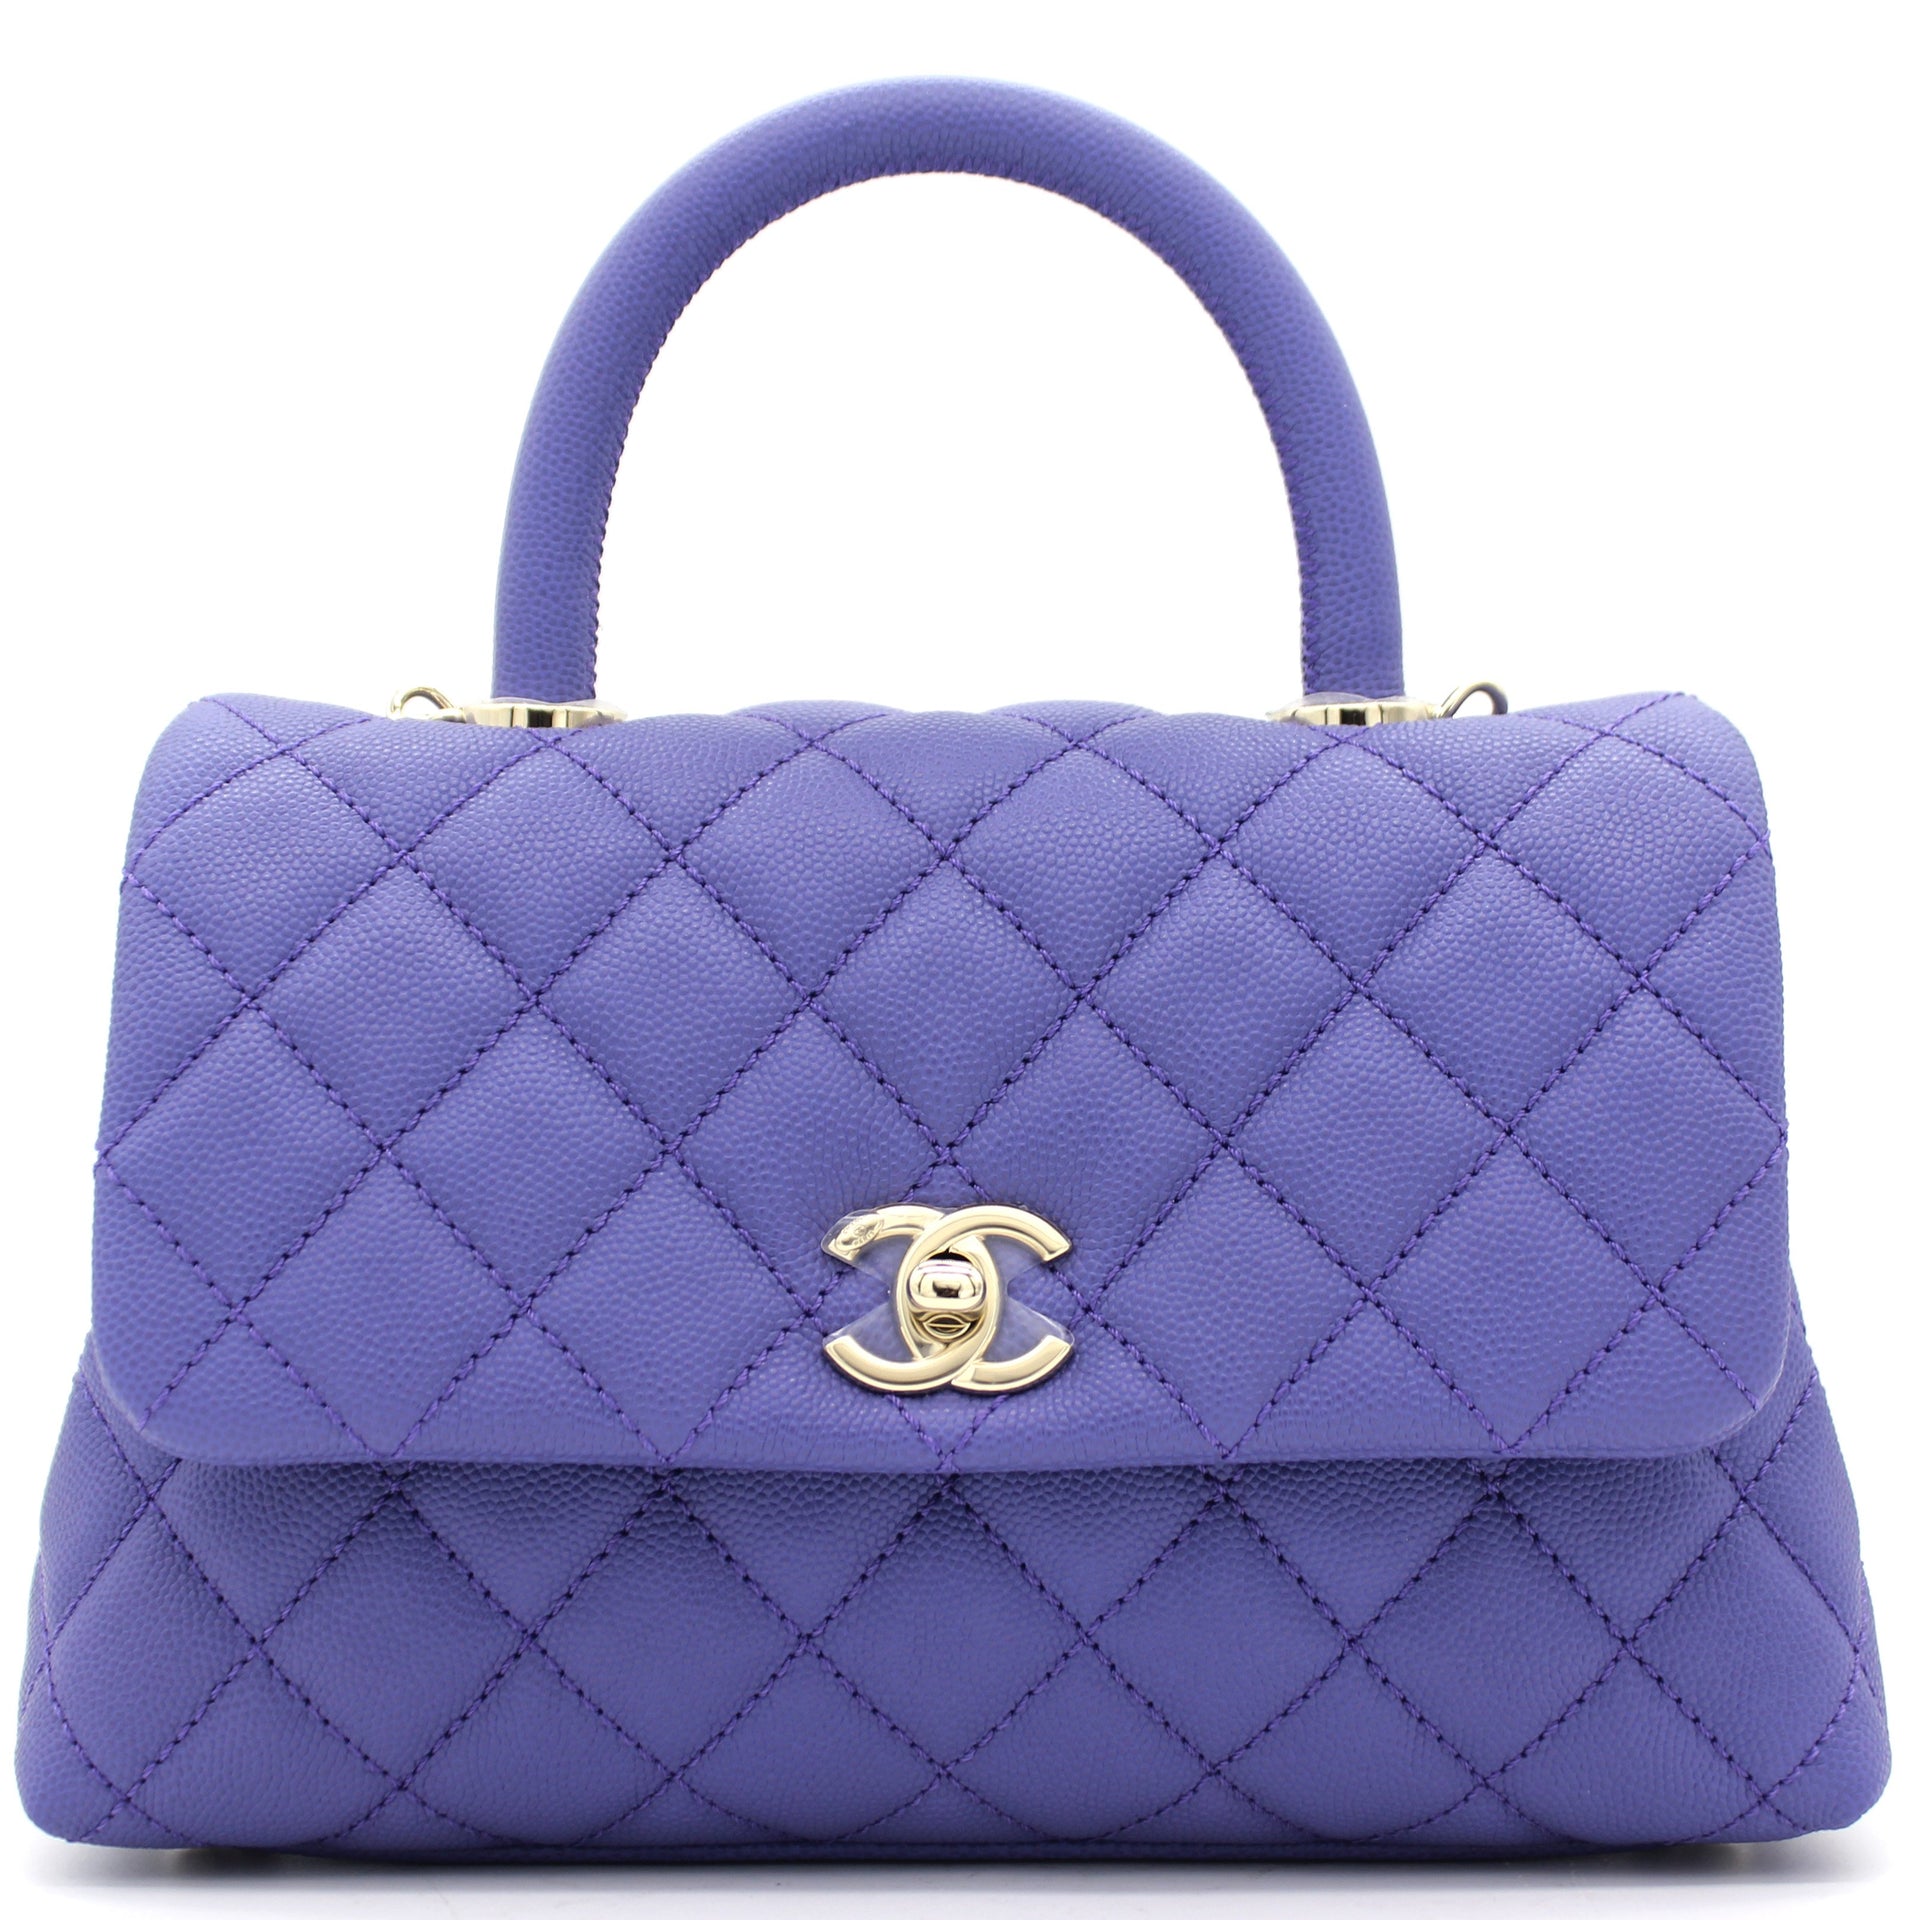 Chanel Purple Quilted Caviar Leather Small Handle Coco Flap Bag